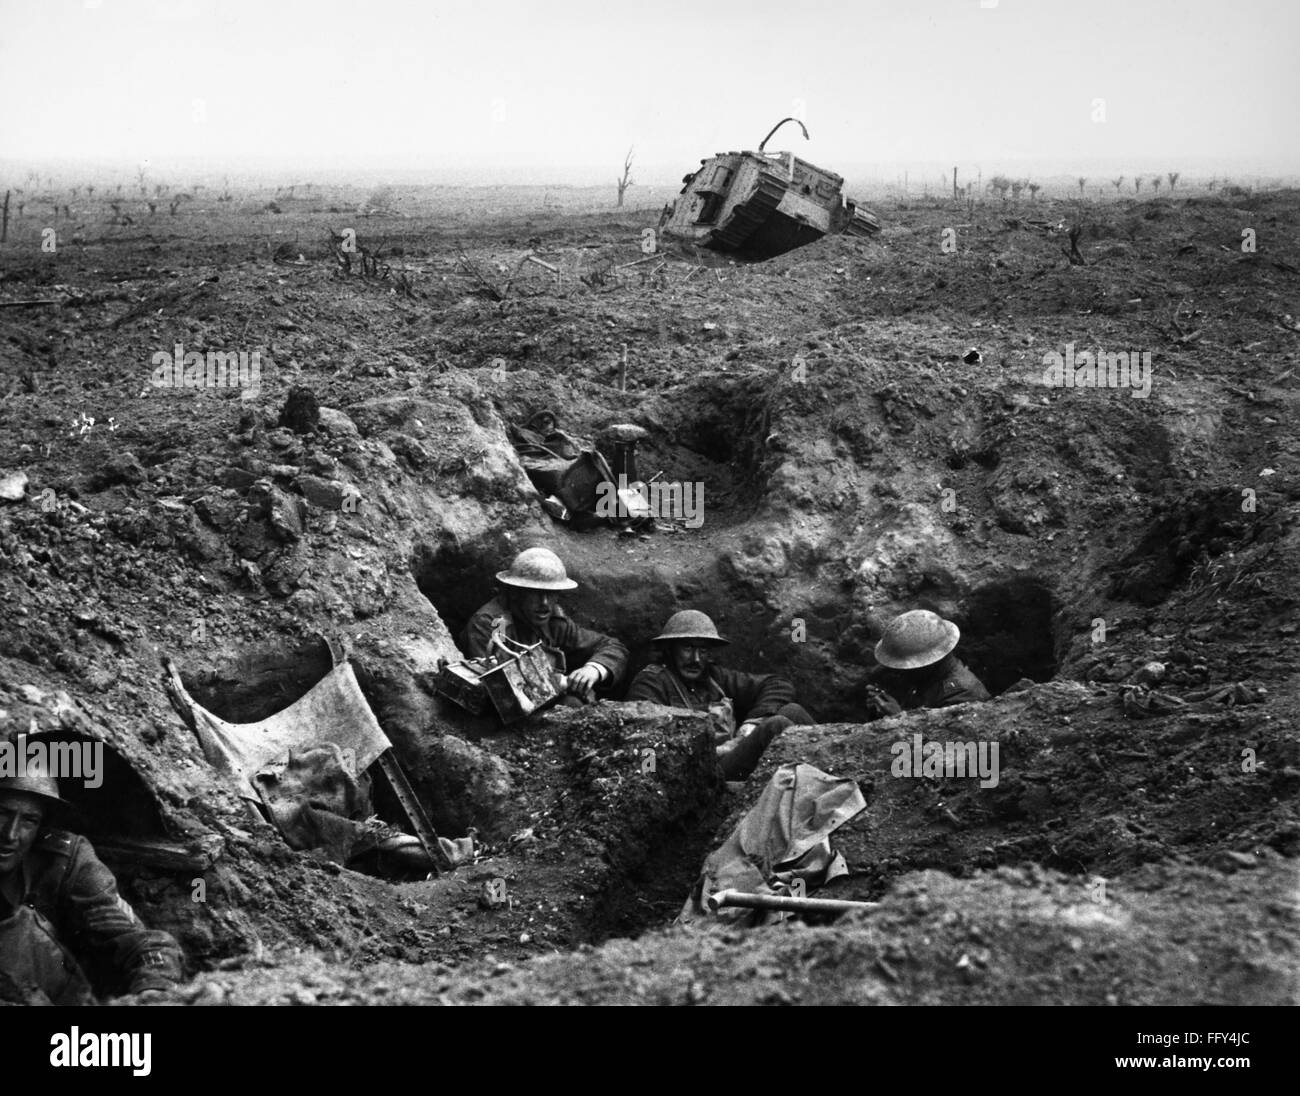 WORLD WAR I: YPRES, 1917. /nBritish troops in a gun-pit trench with a destroyed Mark IV tank in the background. Photographed during the battle at Menin Road Ridge, part of the Battle of Ypres, 22 September 1917. Stock Photo